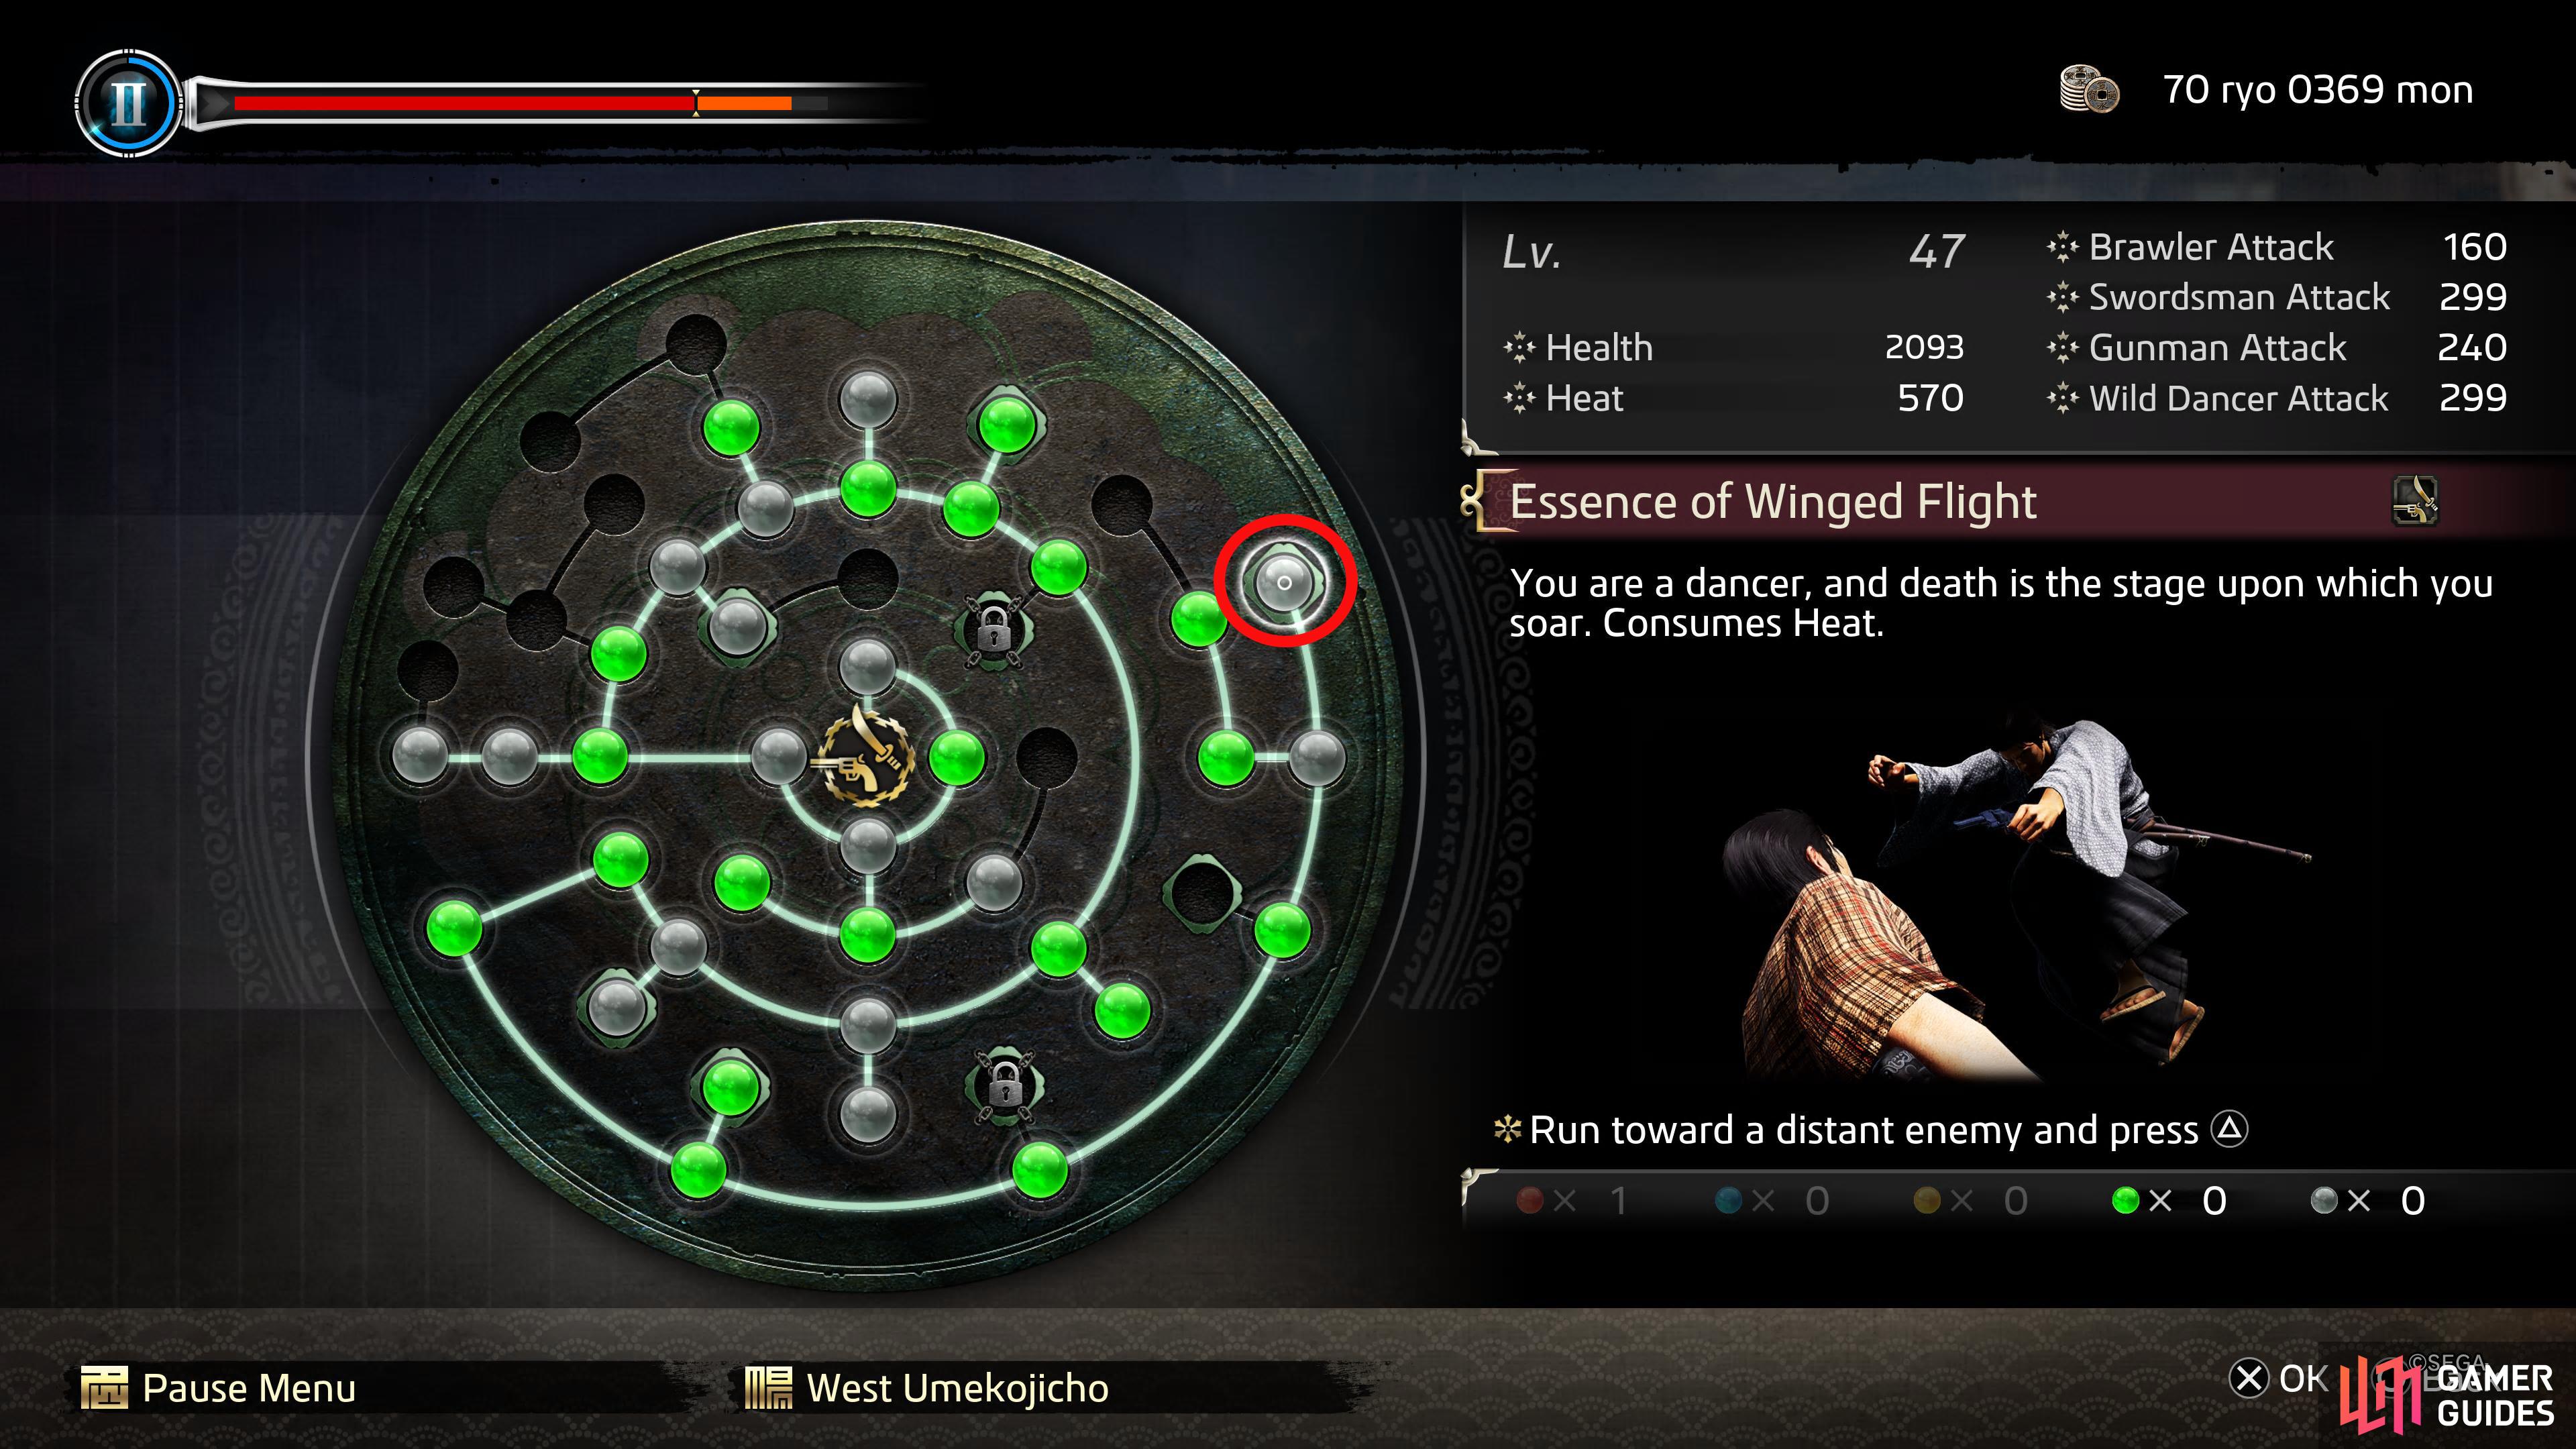 Here's where Winged Flight appears on the Ability Wheel.